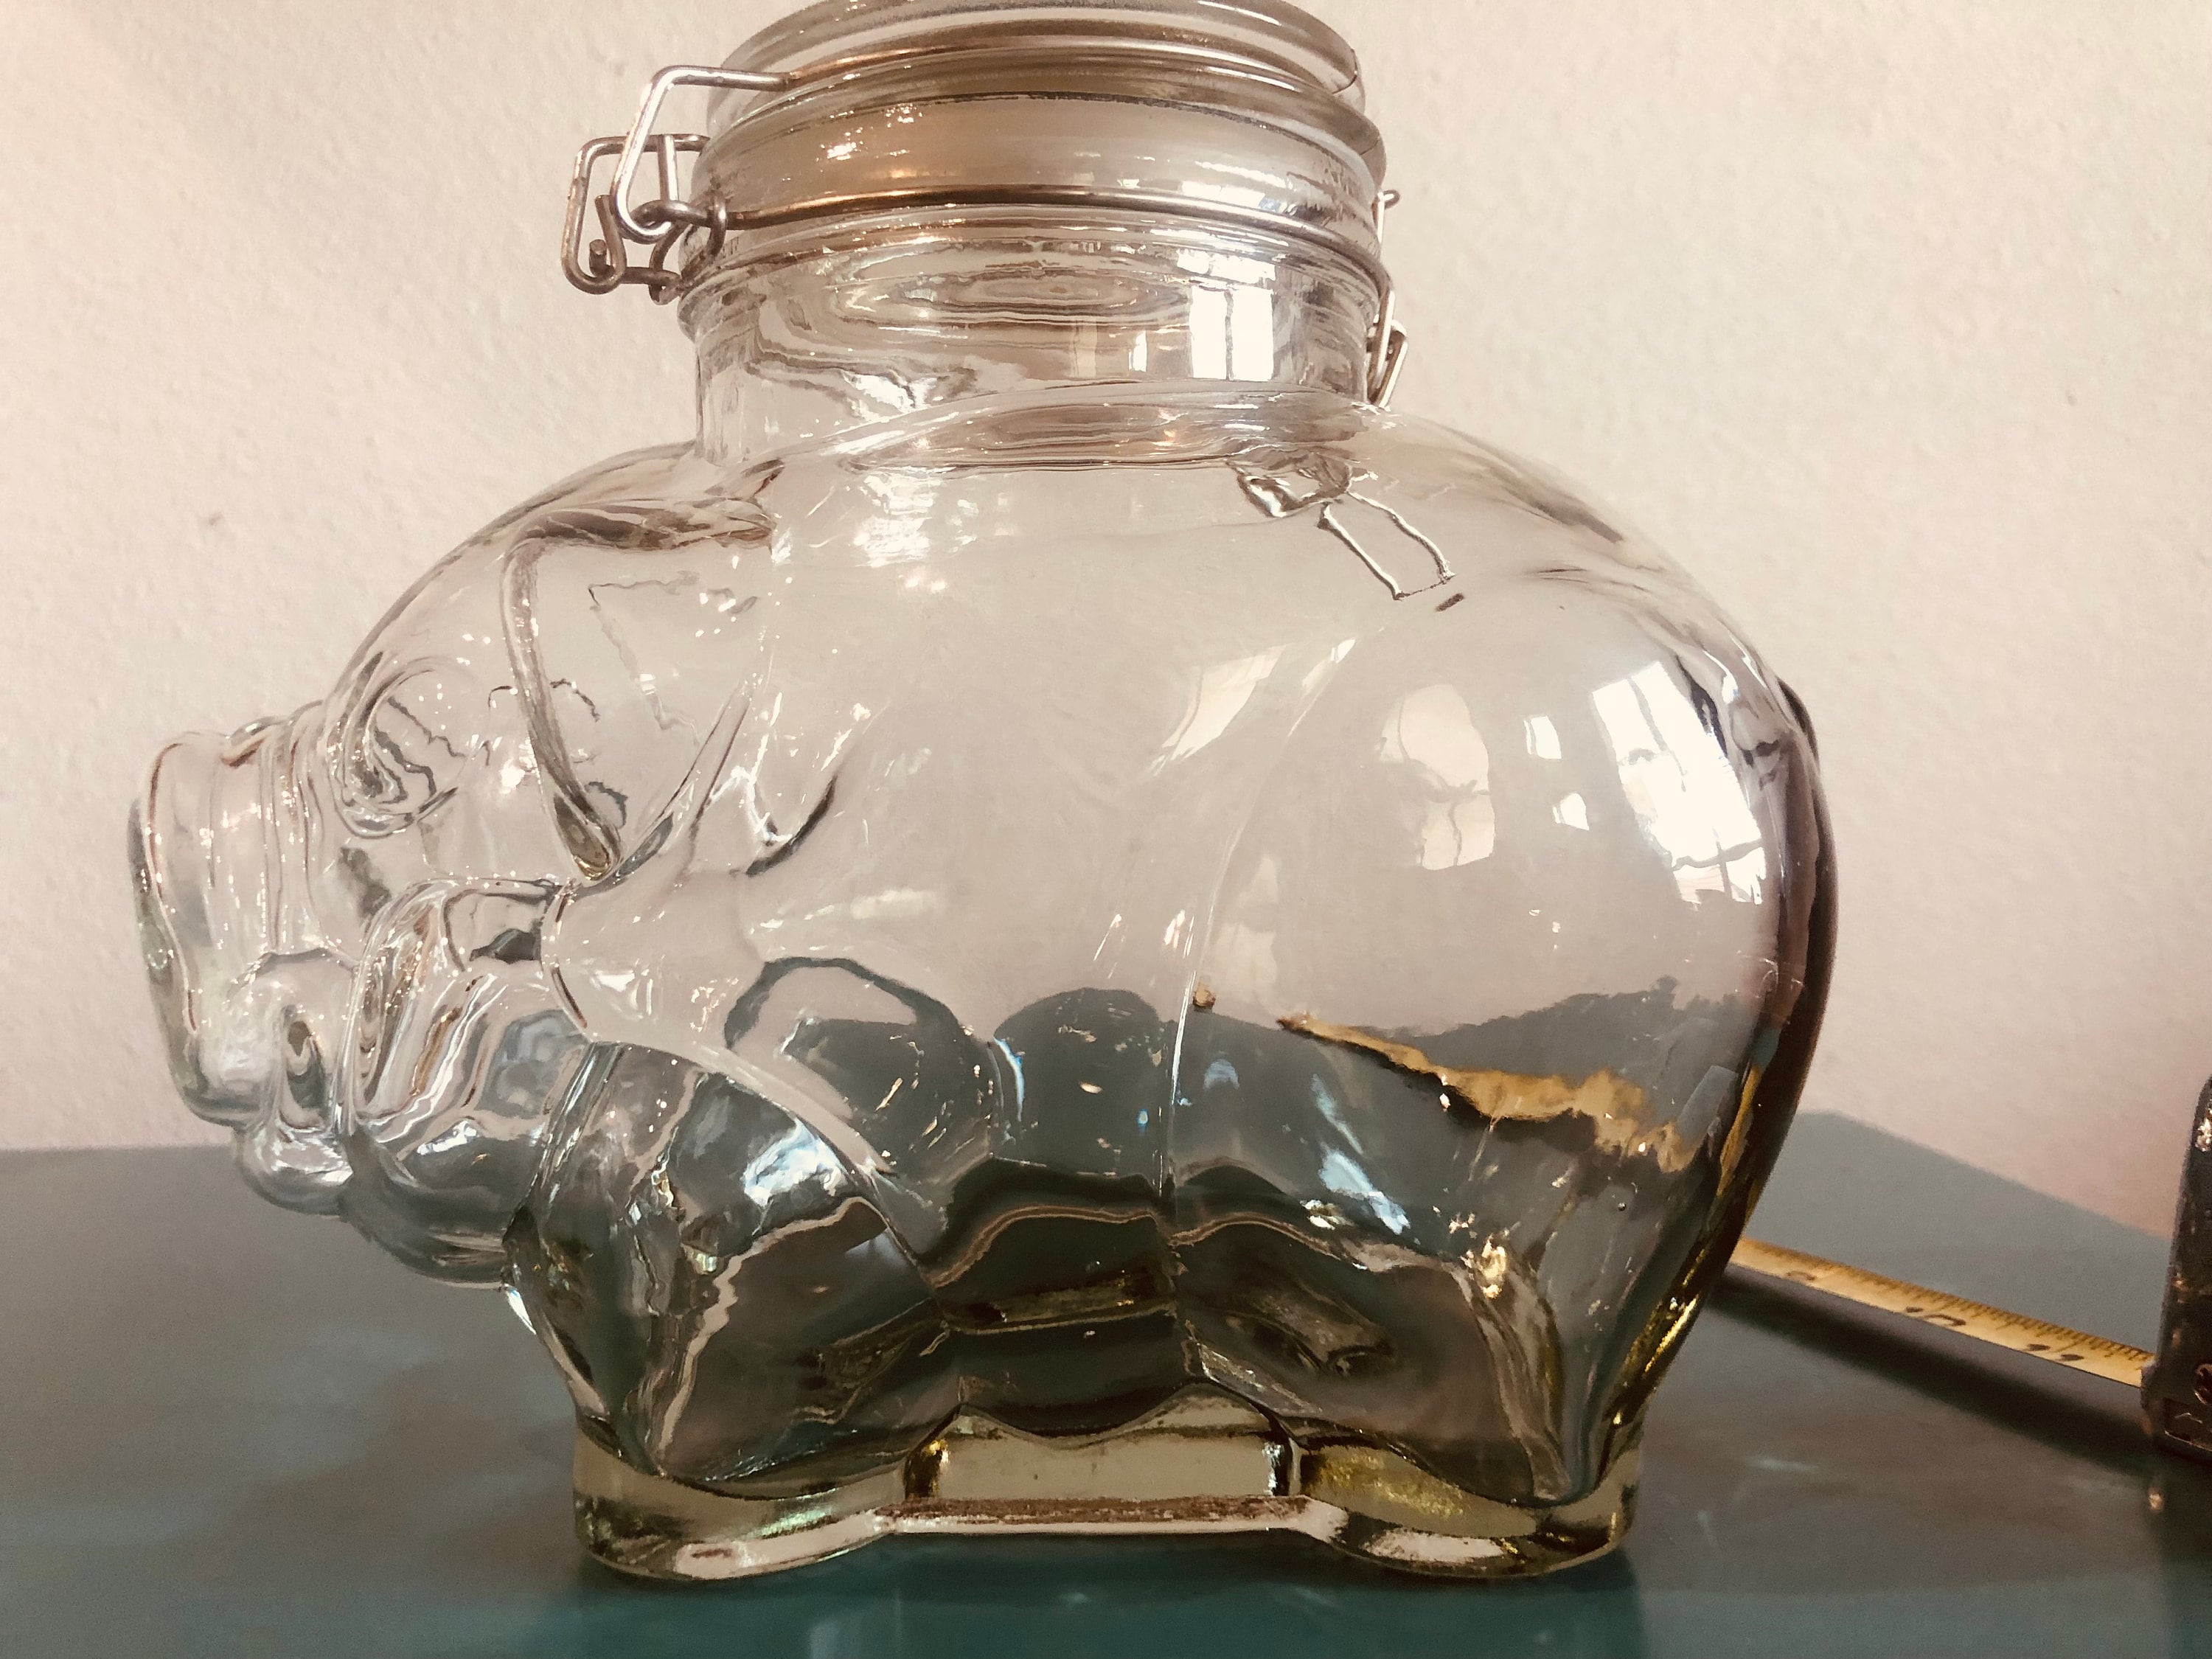 Tall Vintage Glass Jar With Wire Clamp Lid, Green Tint, 13 Inches Tall, 12  Sided 